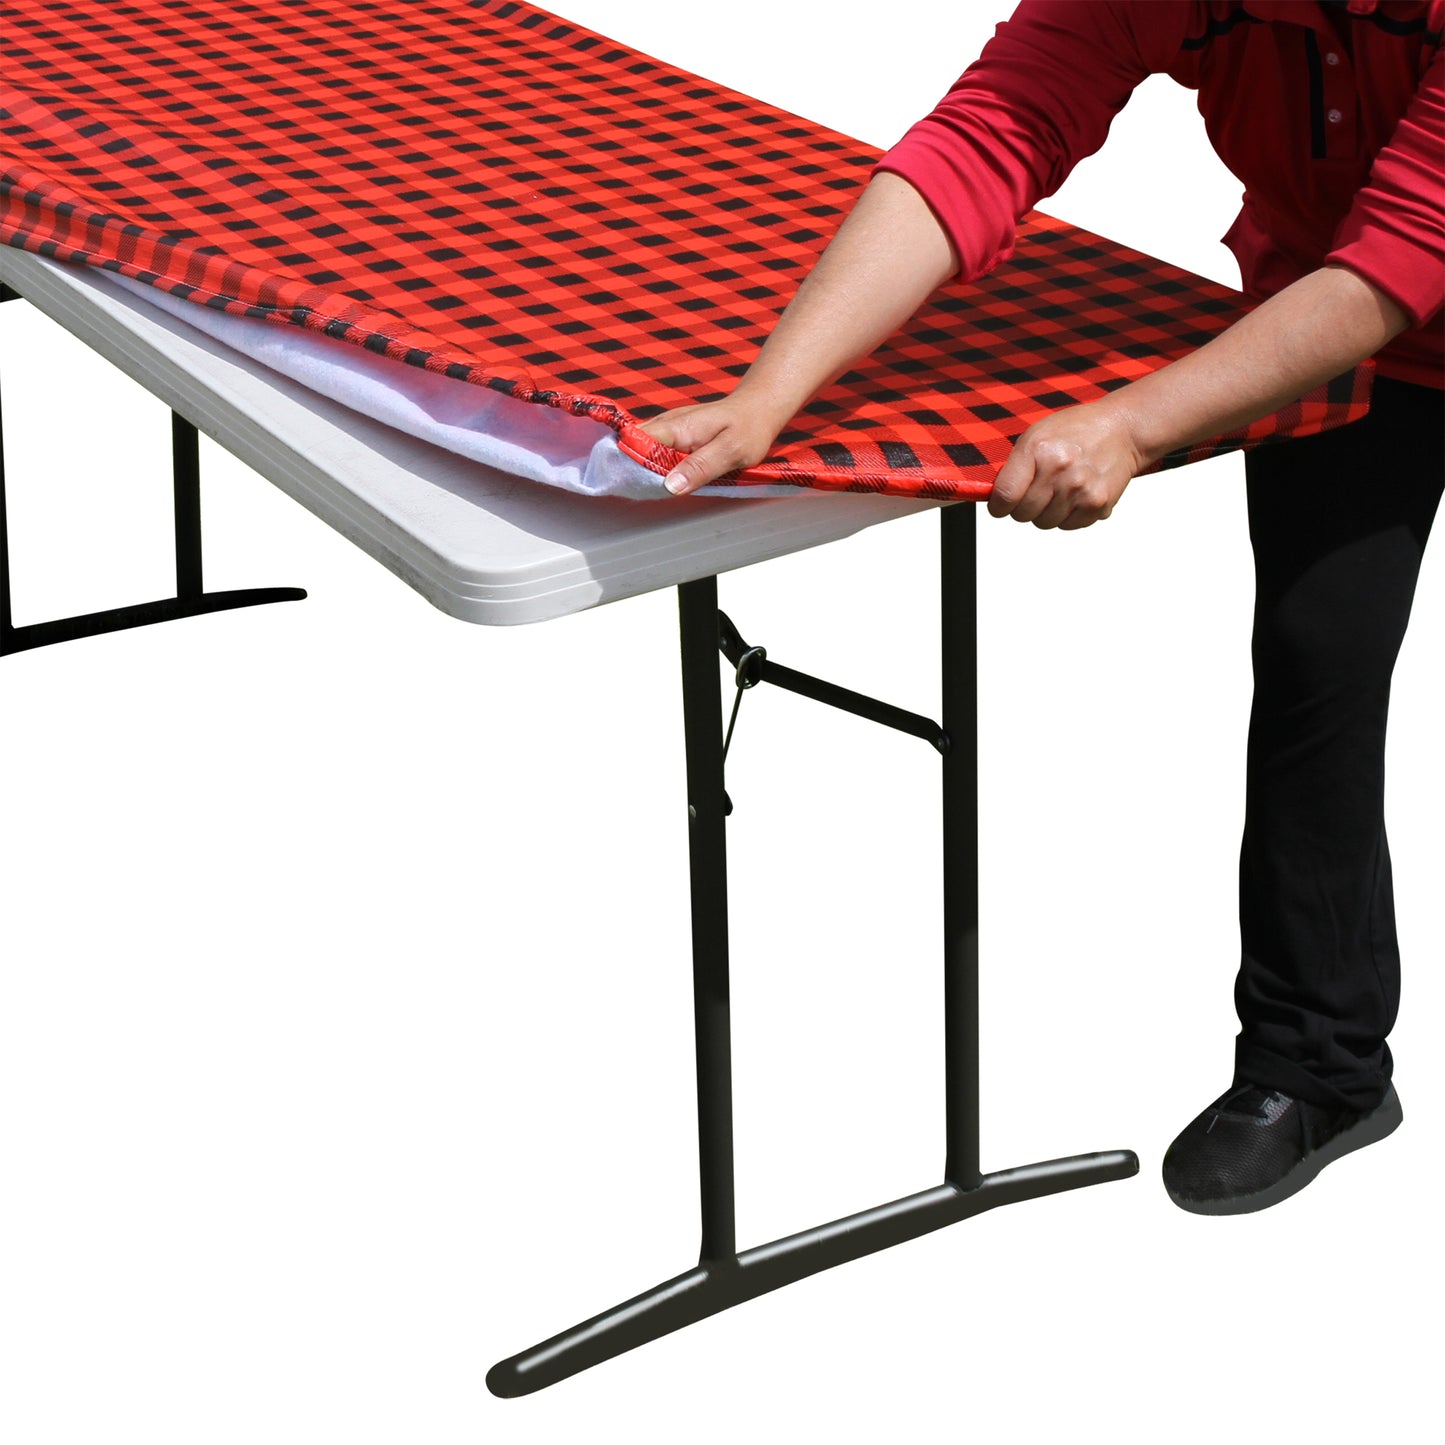 TableCloth PLUS 72" Checkerboard Black and Red Fitted PEVA Vinyl Tablecloth for 6' Folding Tables is easy to clean, water proof, easy to install, and has an elastic rim